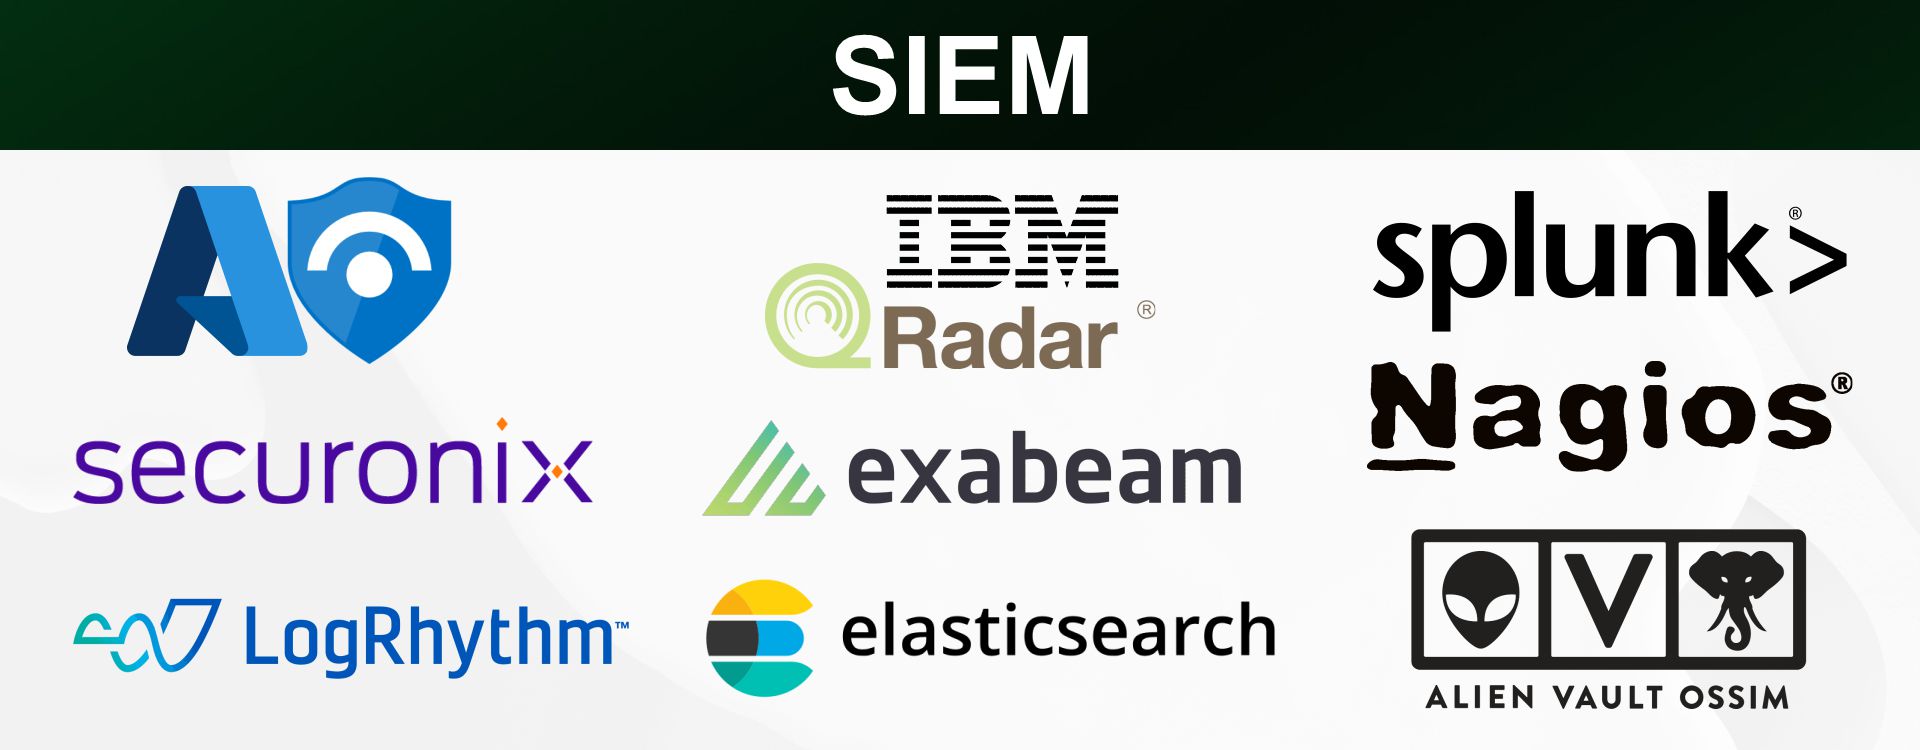 cybersecurity products - siem